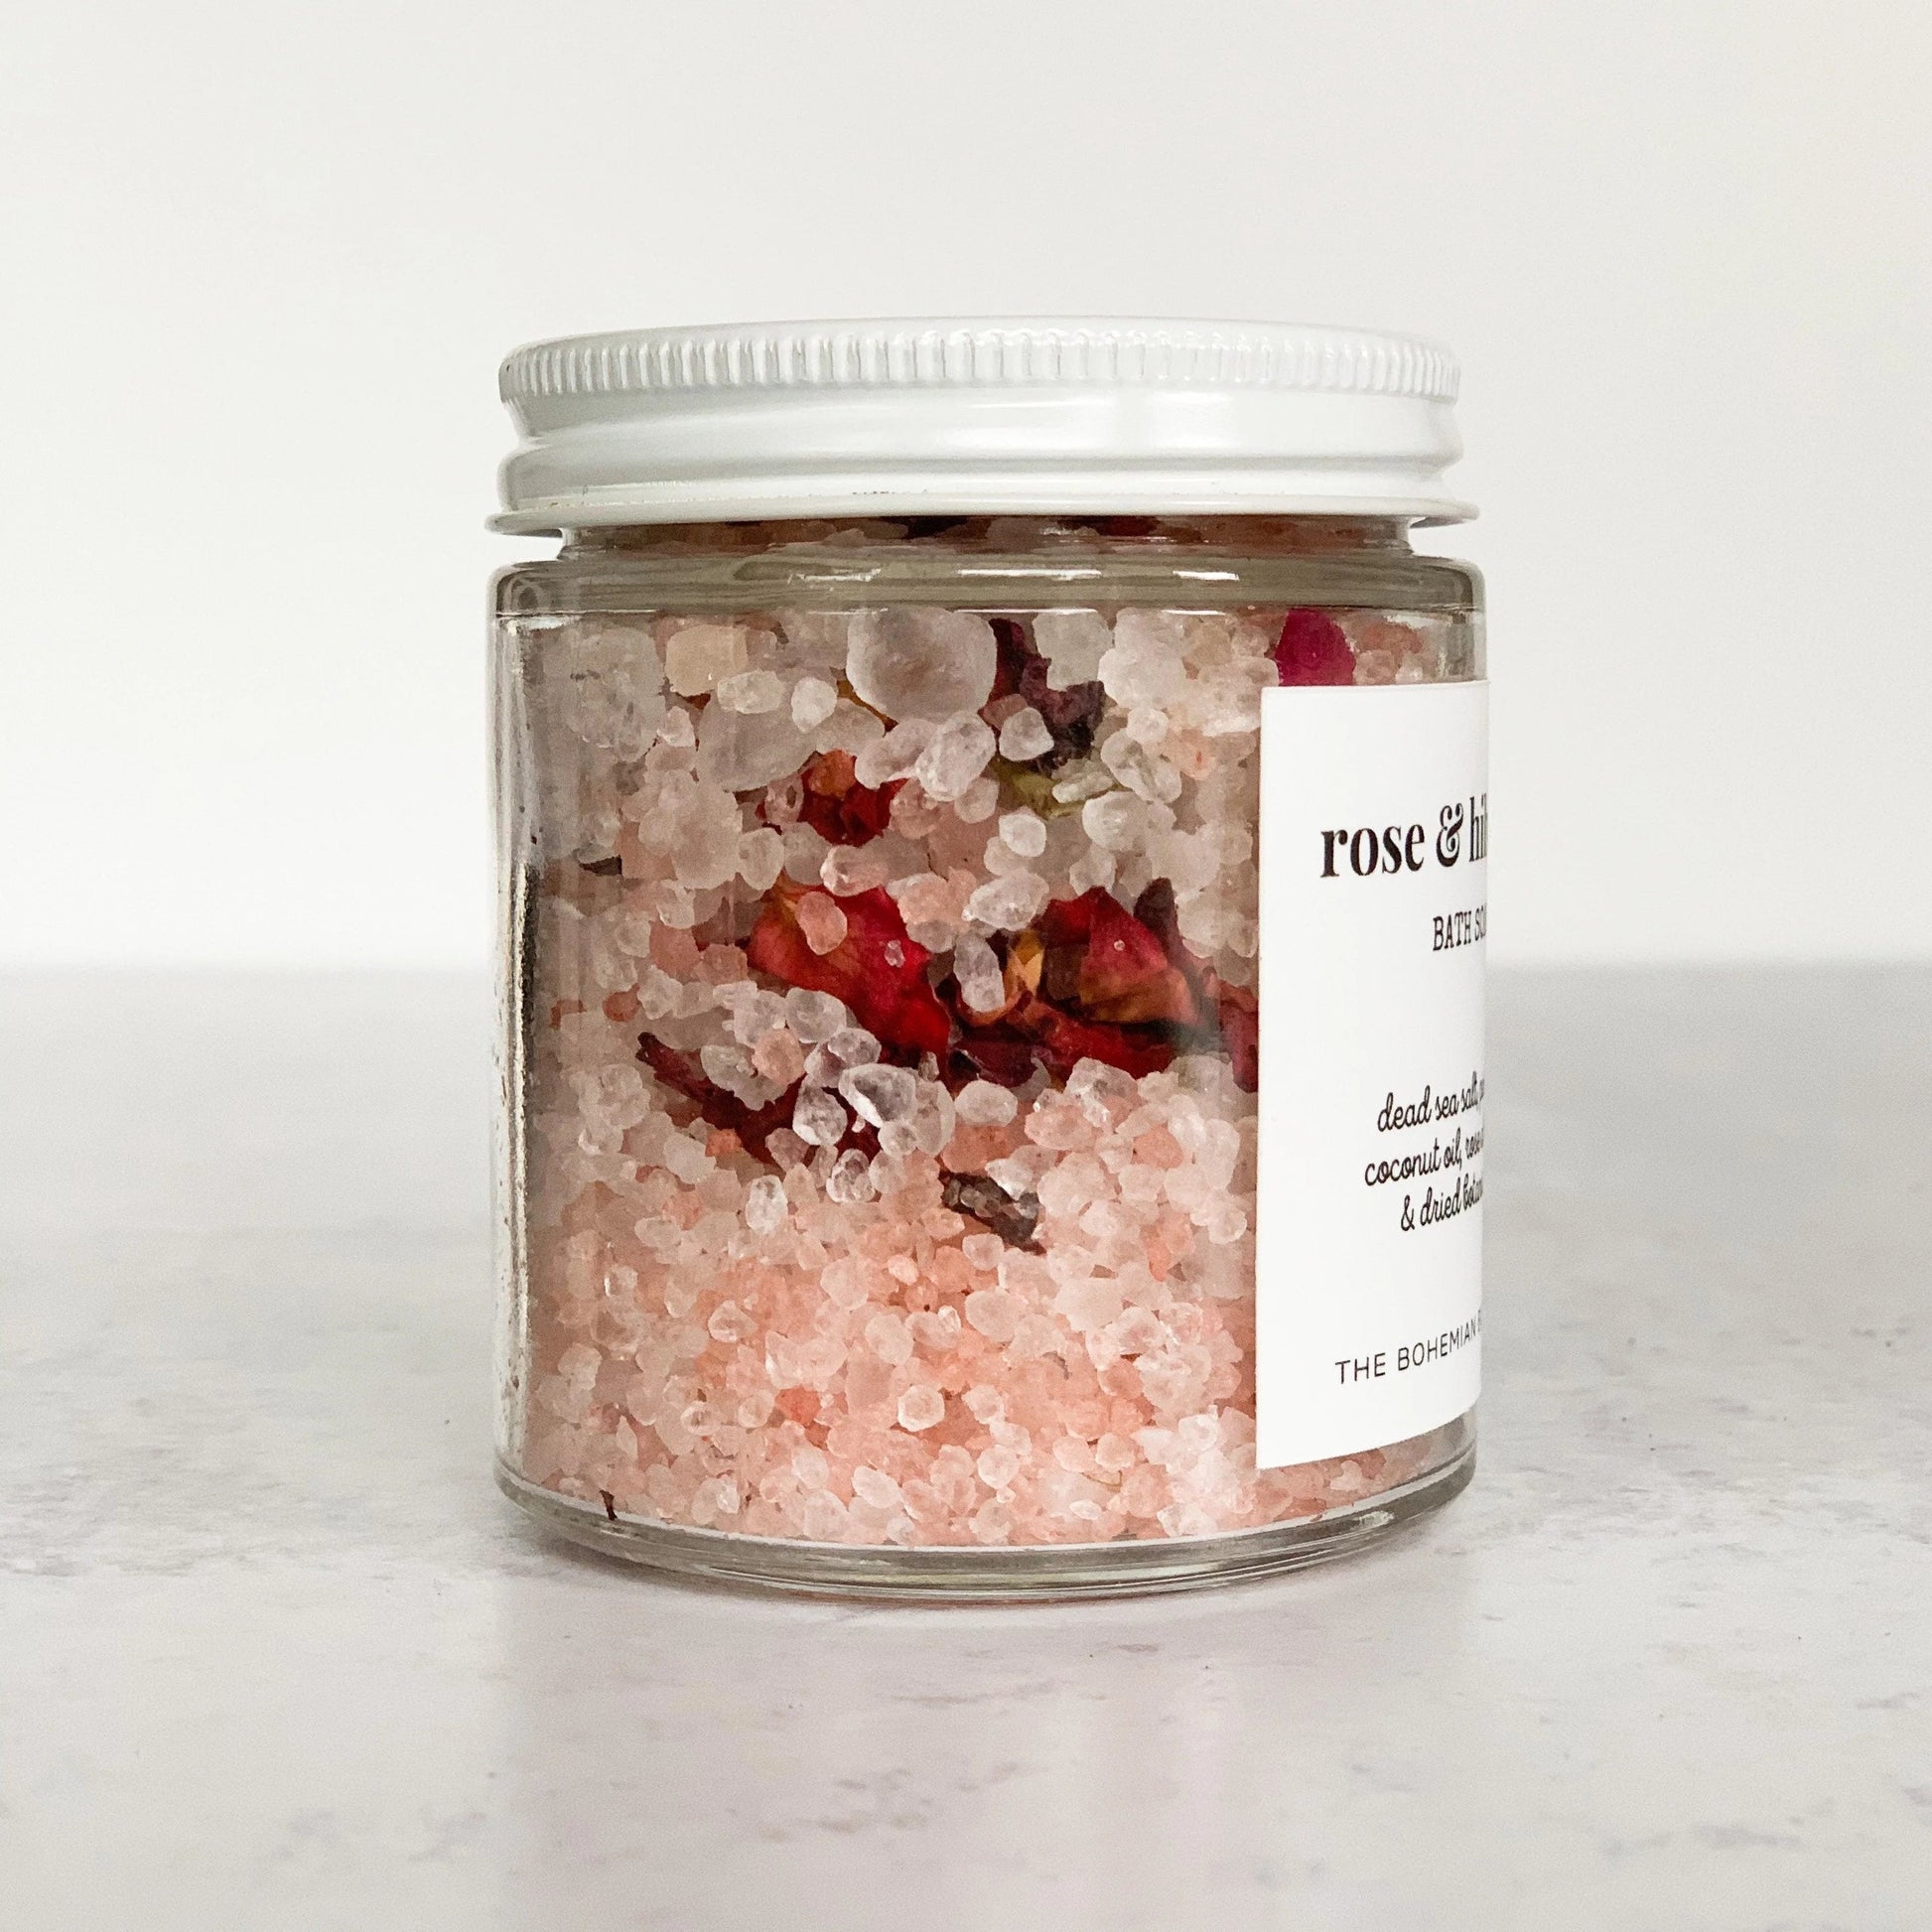 Rose and Hibiscus Bath Soak in a clear glass jar with white lid